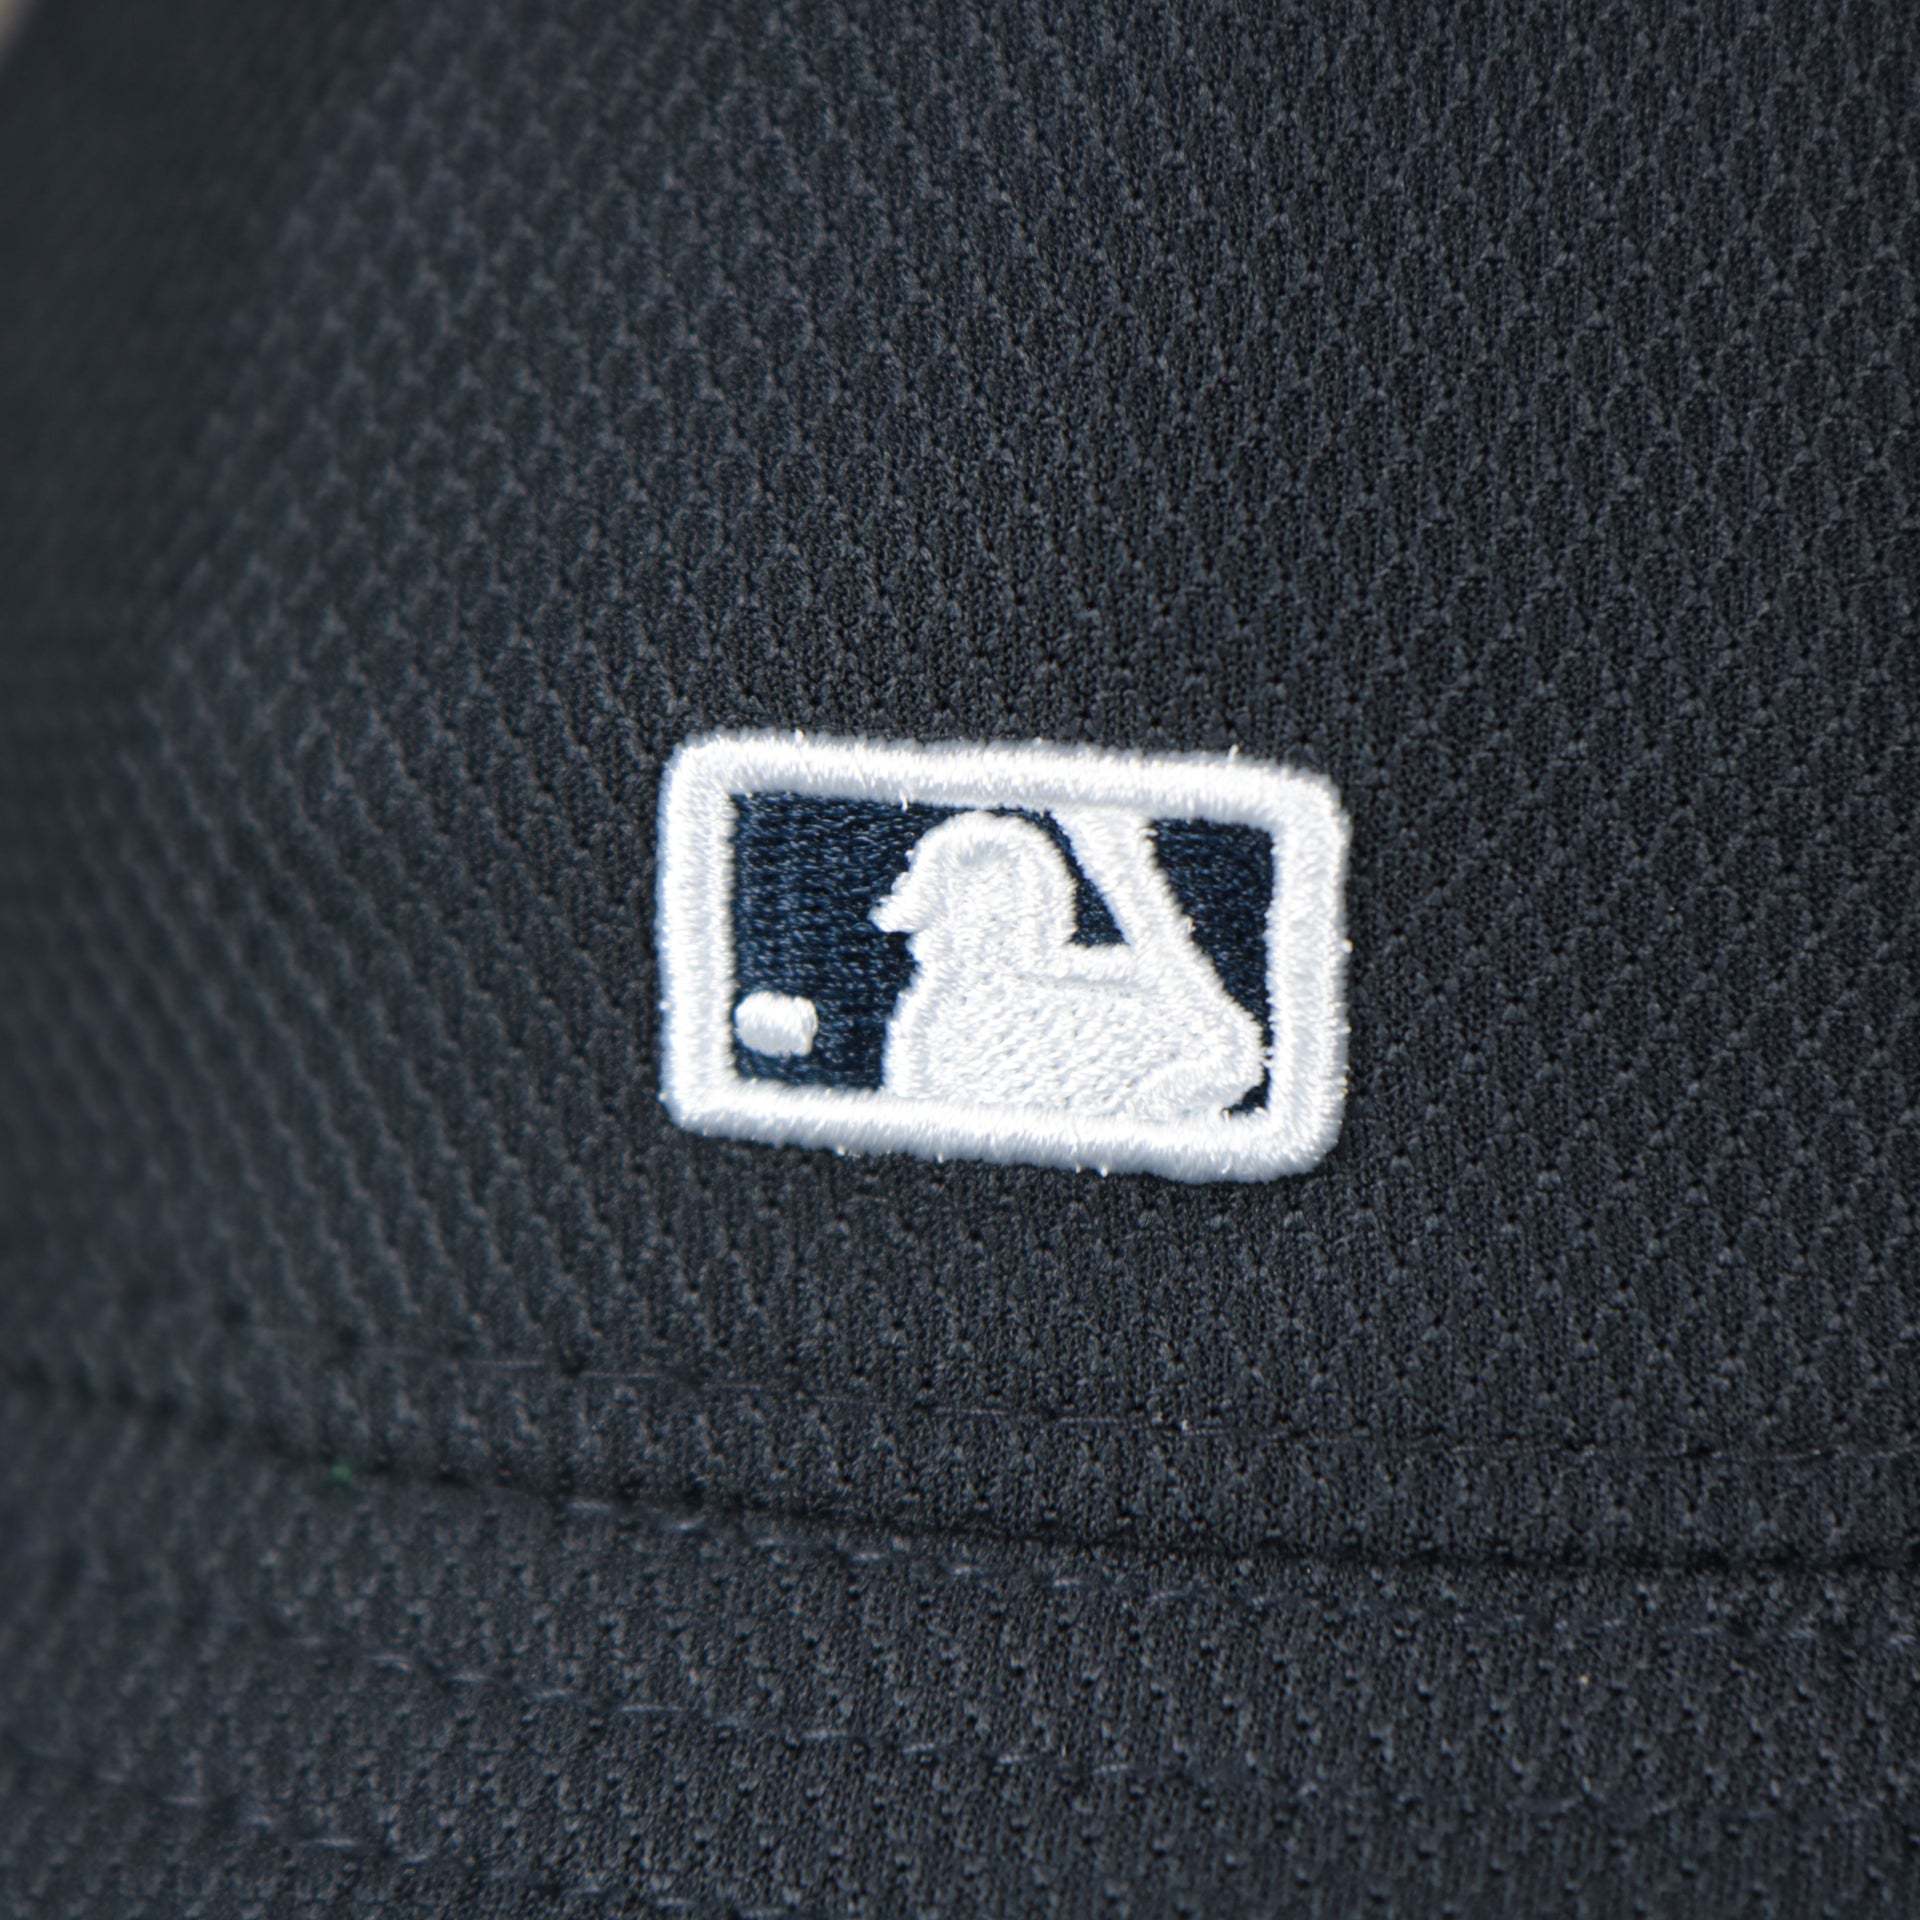 A close up of the MLB Batterman logo on the New York Yankees MLB 2022 Spring Training Onfield Bucket Hat